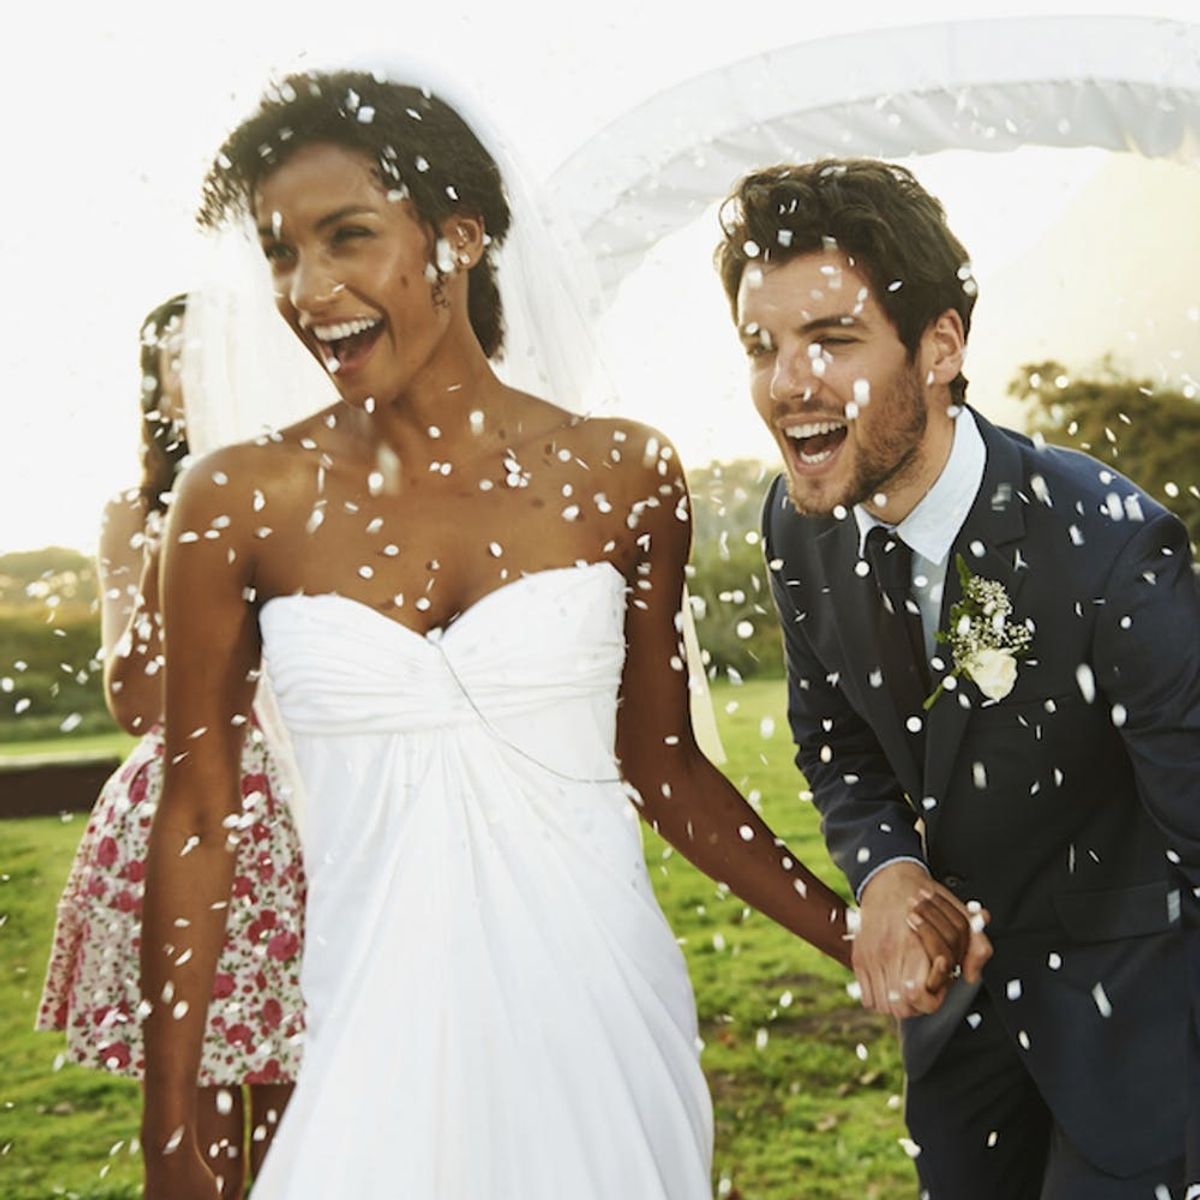 Give These Wedding Traditions the Boot